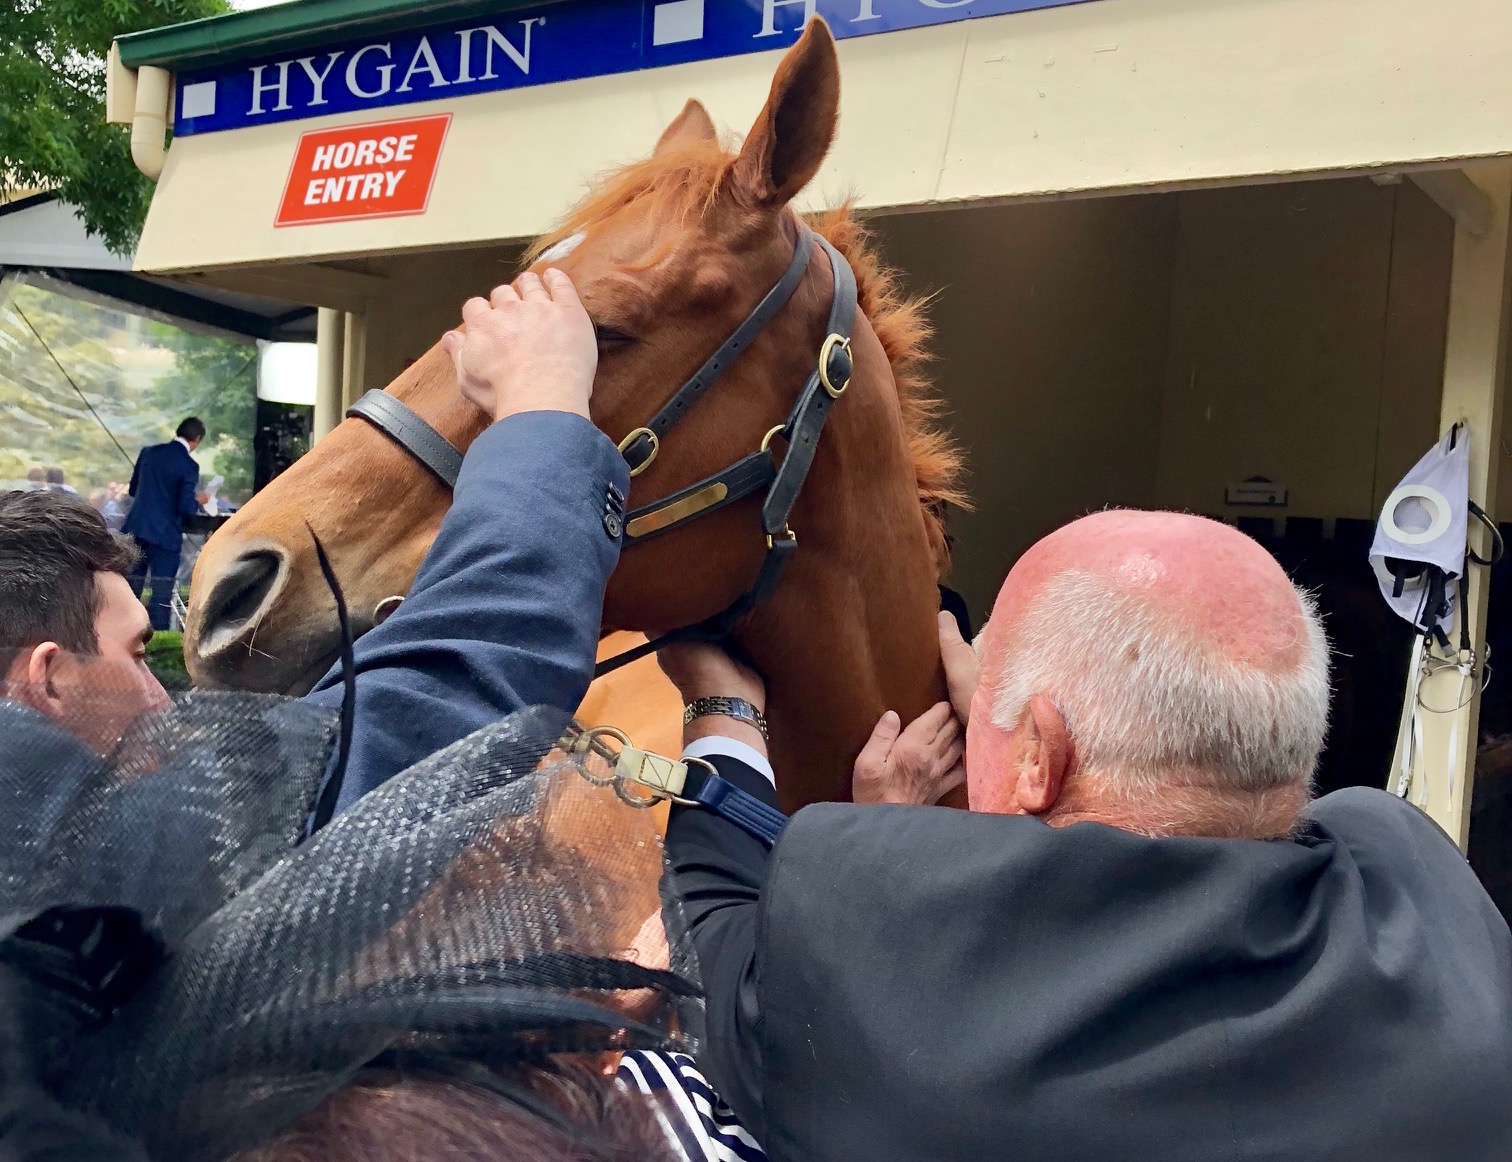 Basking in the attention: retired five-time Cox Plate contender Happy Trails. Photo: Amanda Duckworth